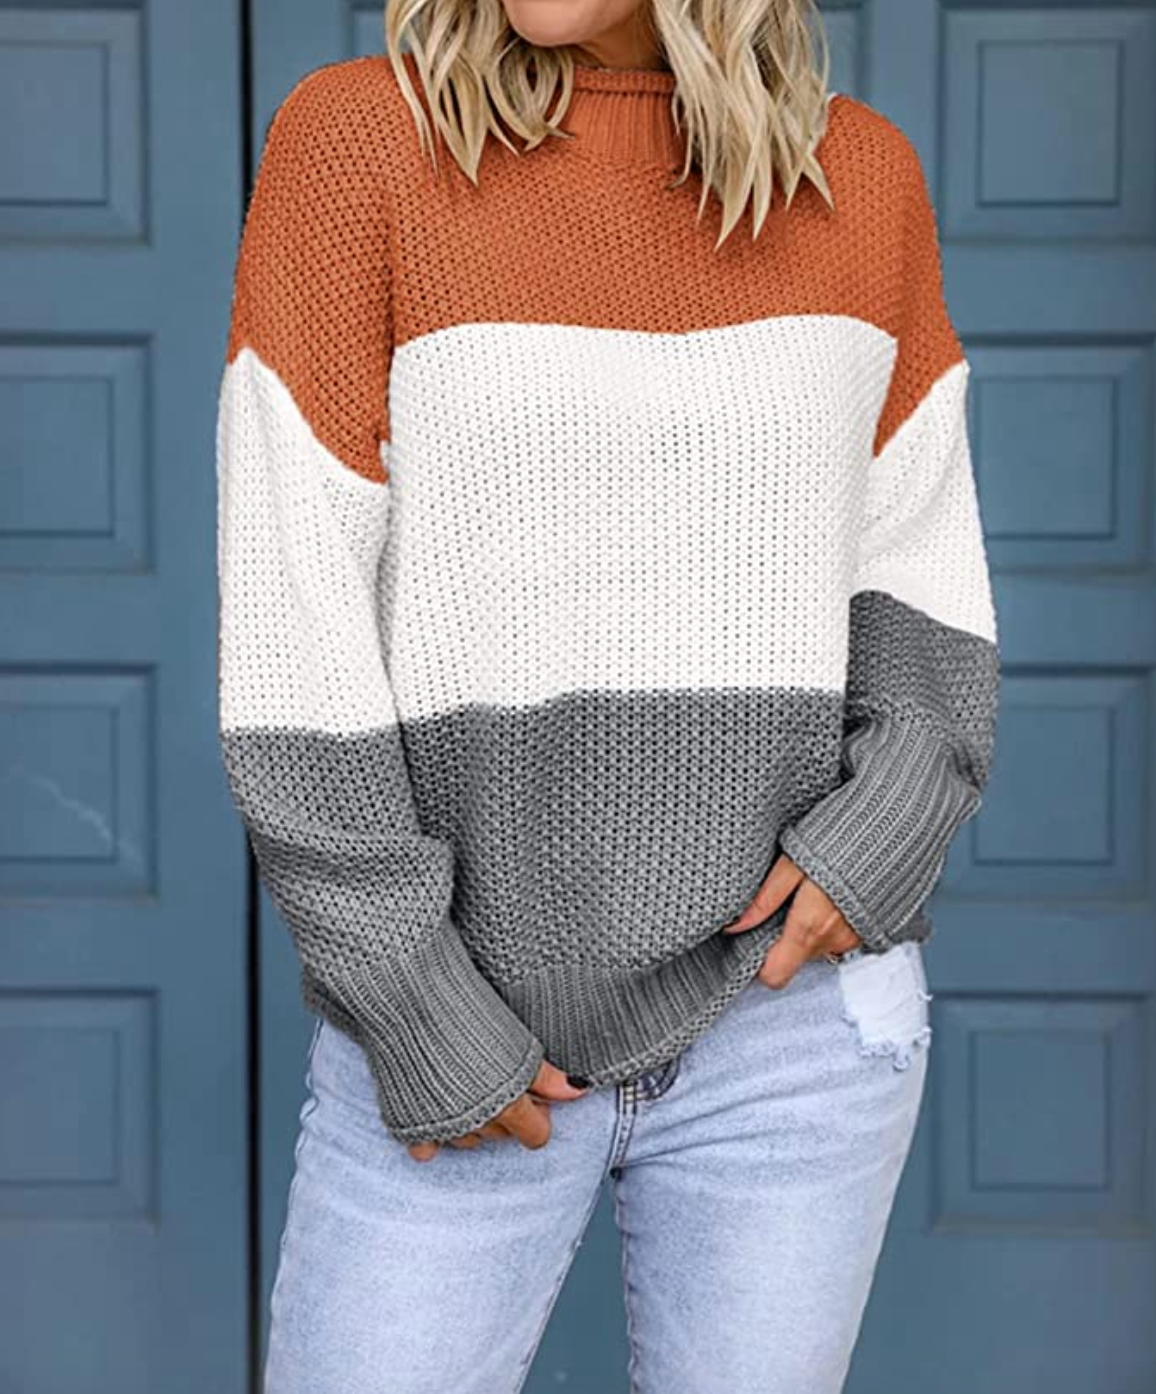 Slouchy, cool, and even cozier in colorblock! (Photo: Amazon)